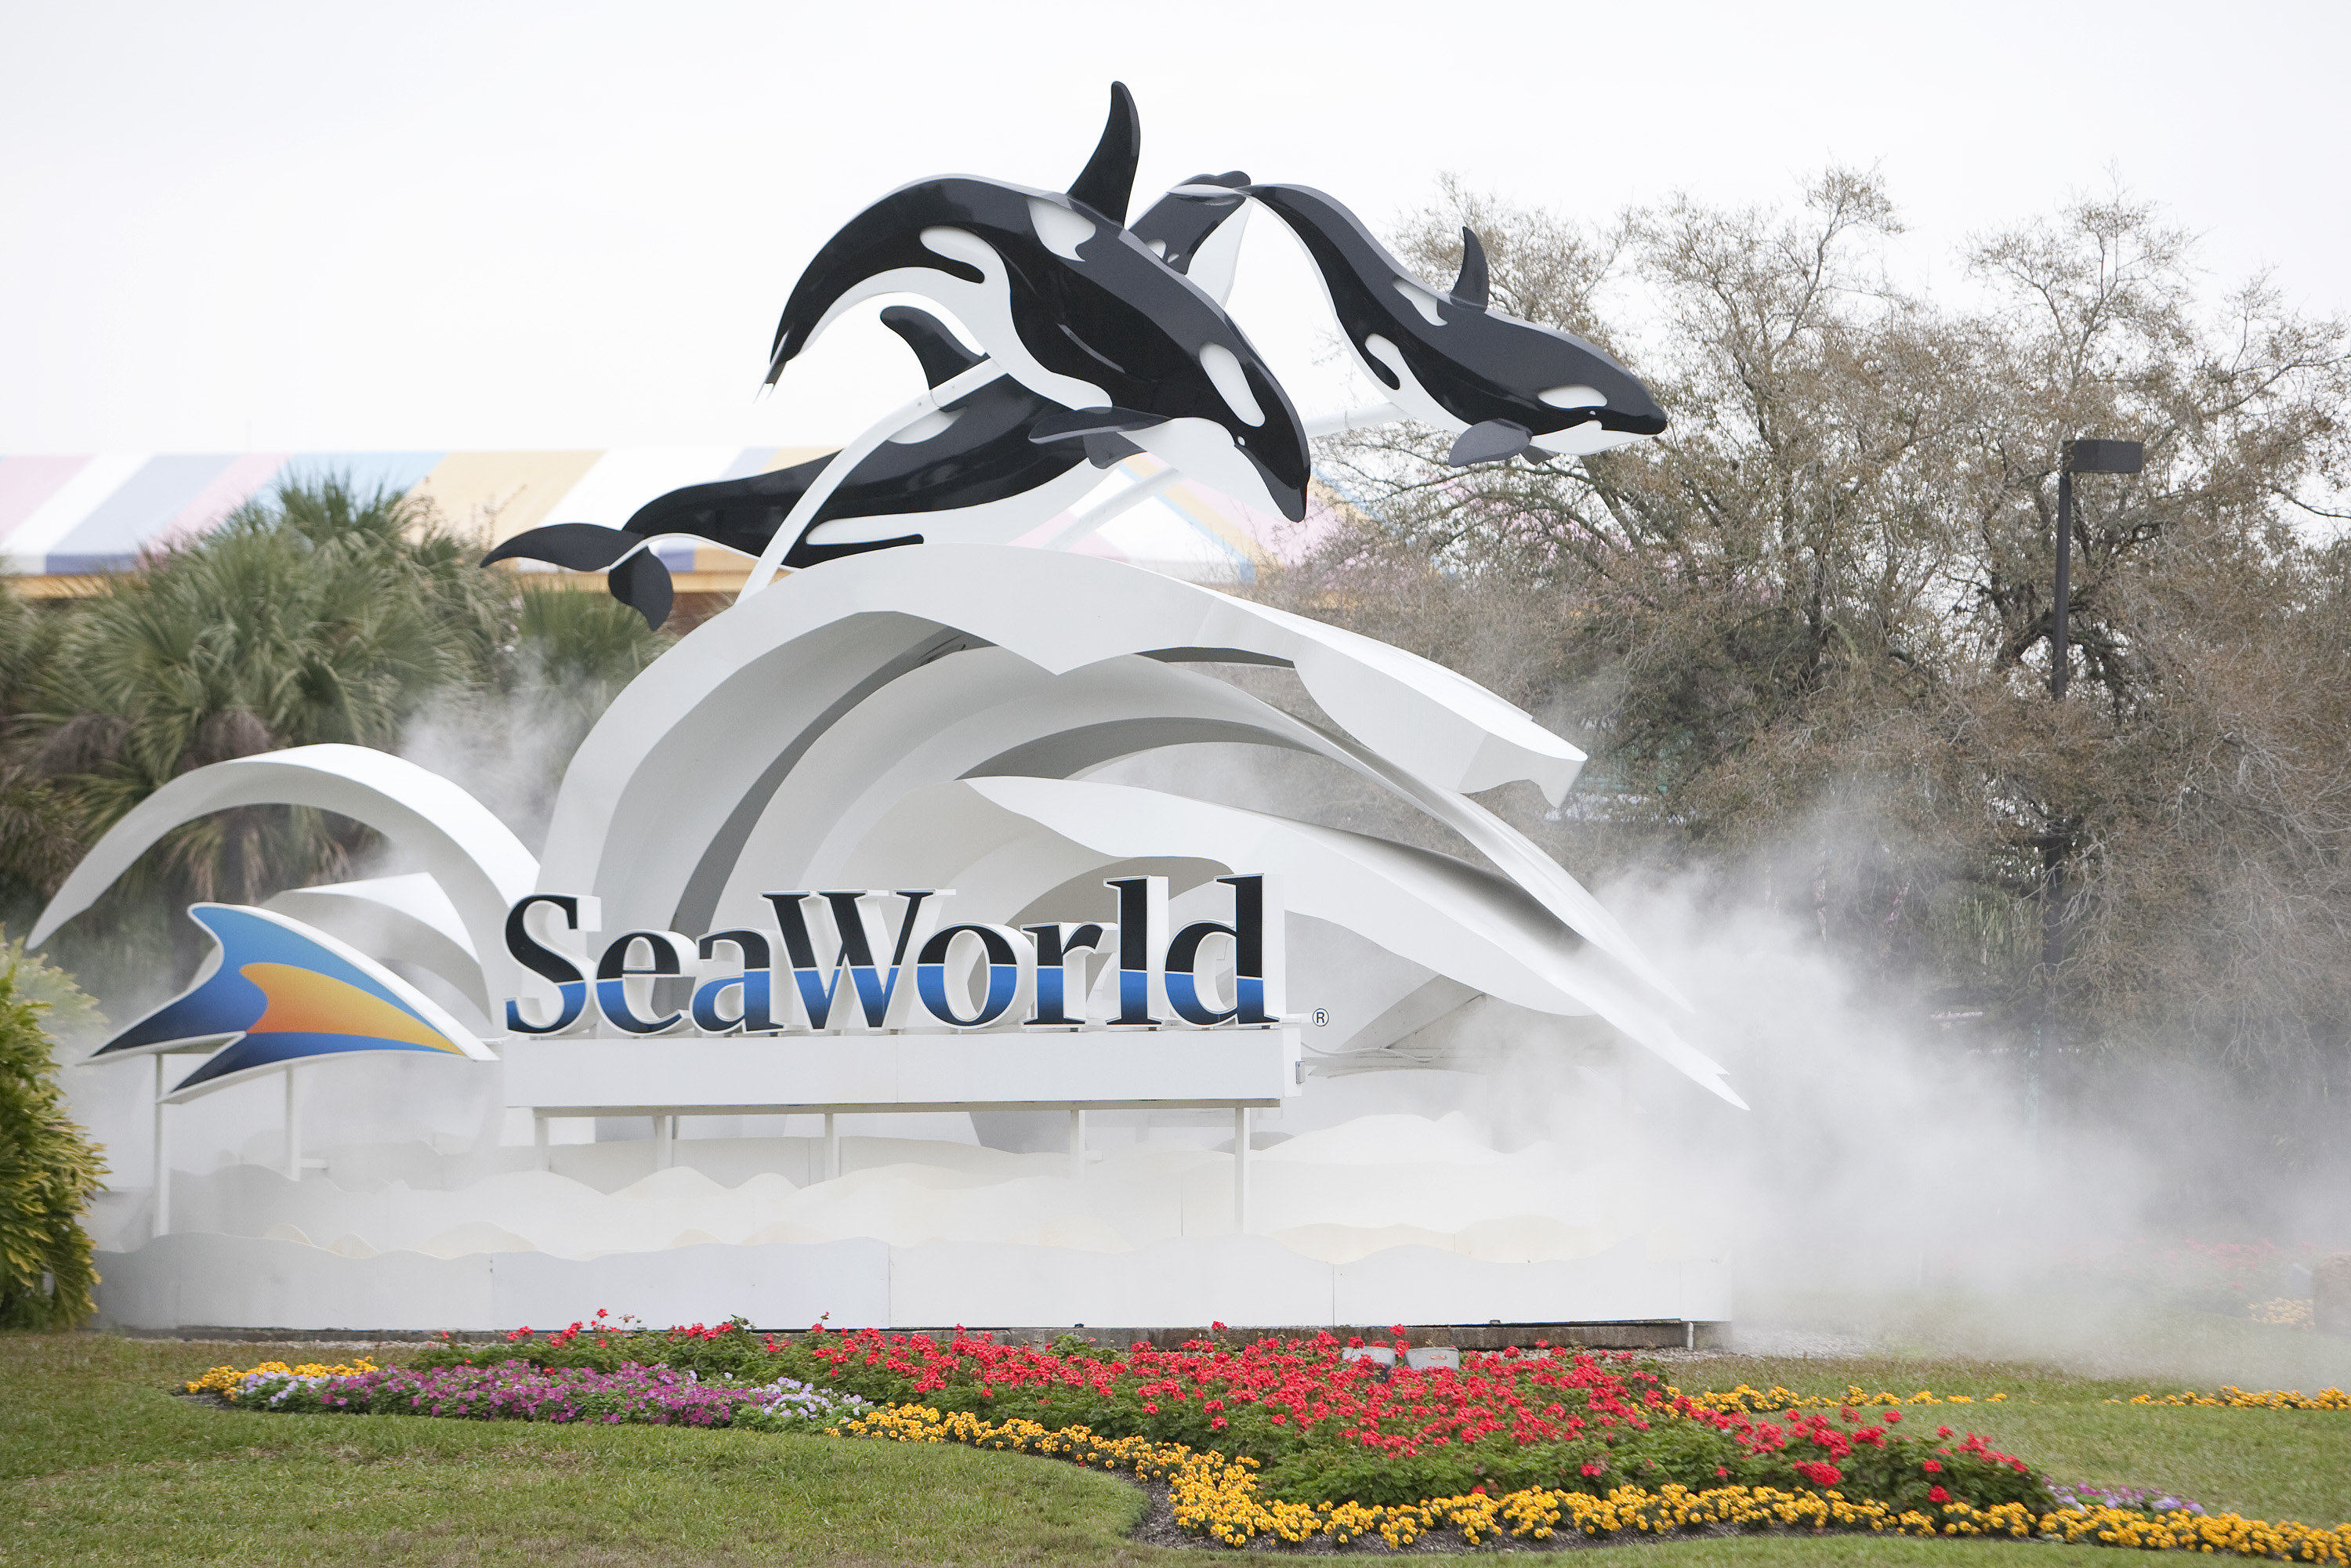 The entrance sign to SeaWorld